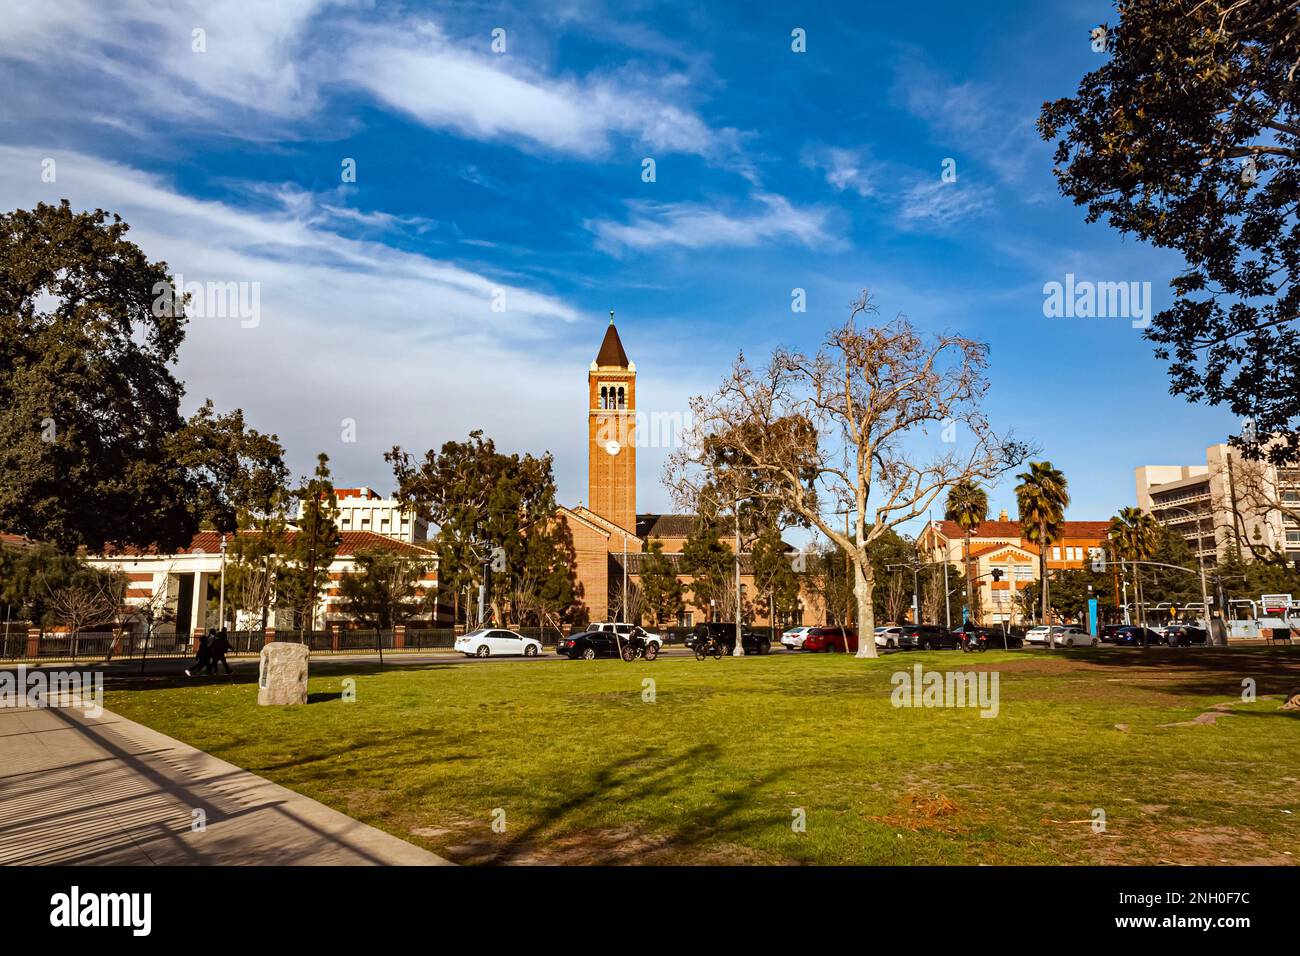 The clock tower of Mudd Hall of Philosophy at USC, the University of Southern California Stock Photo